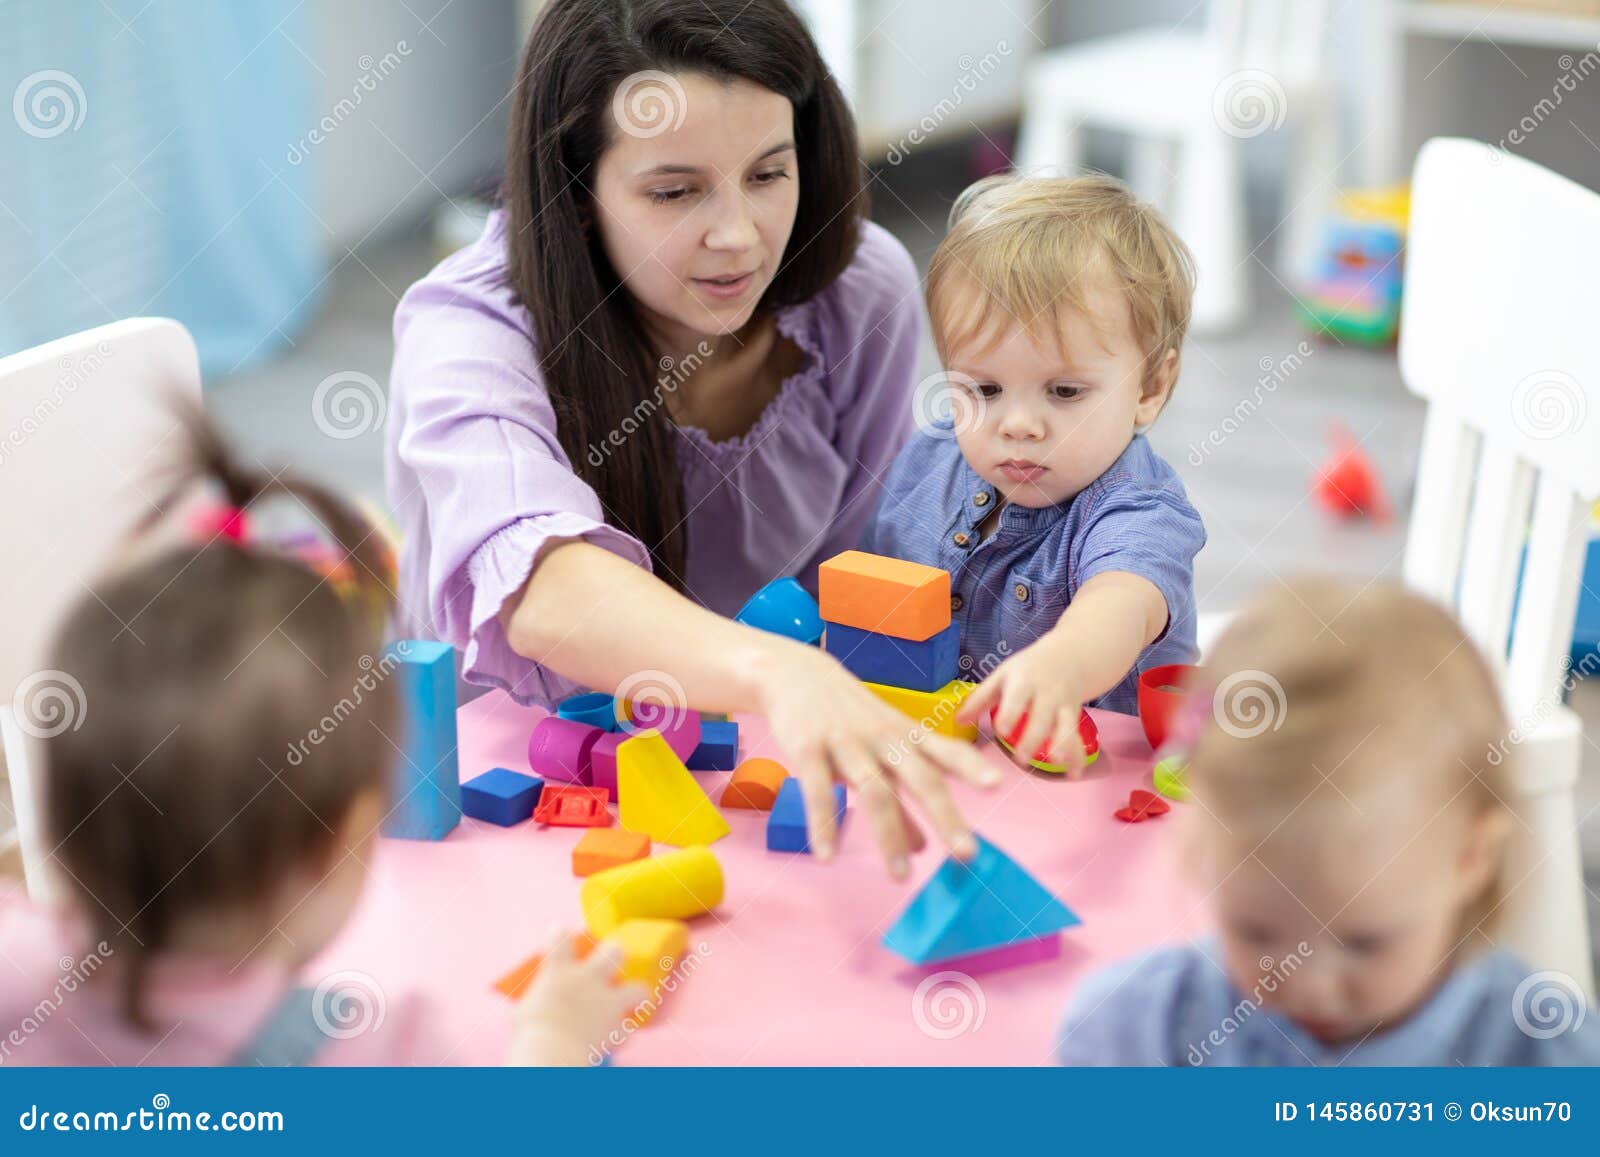 female teacher sitting at table in playroom with three kindergarten children constructing